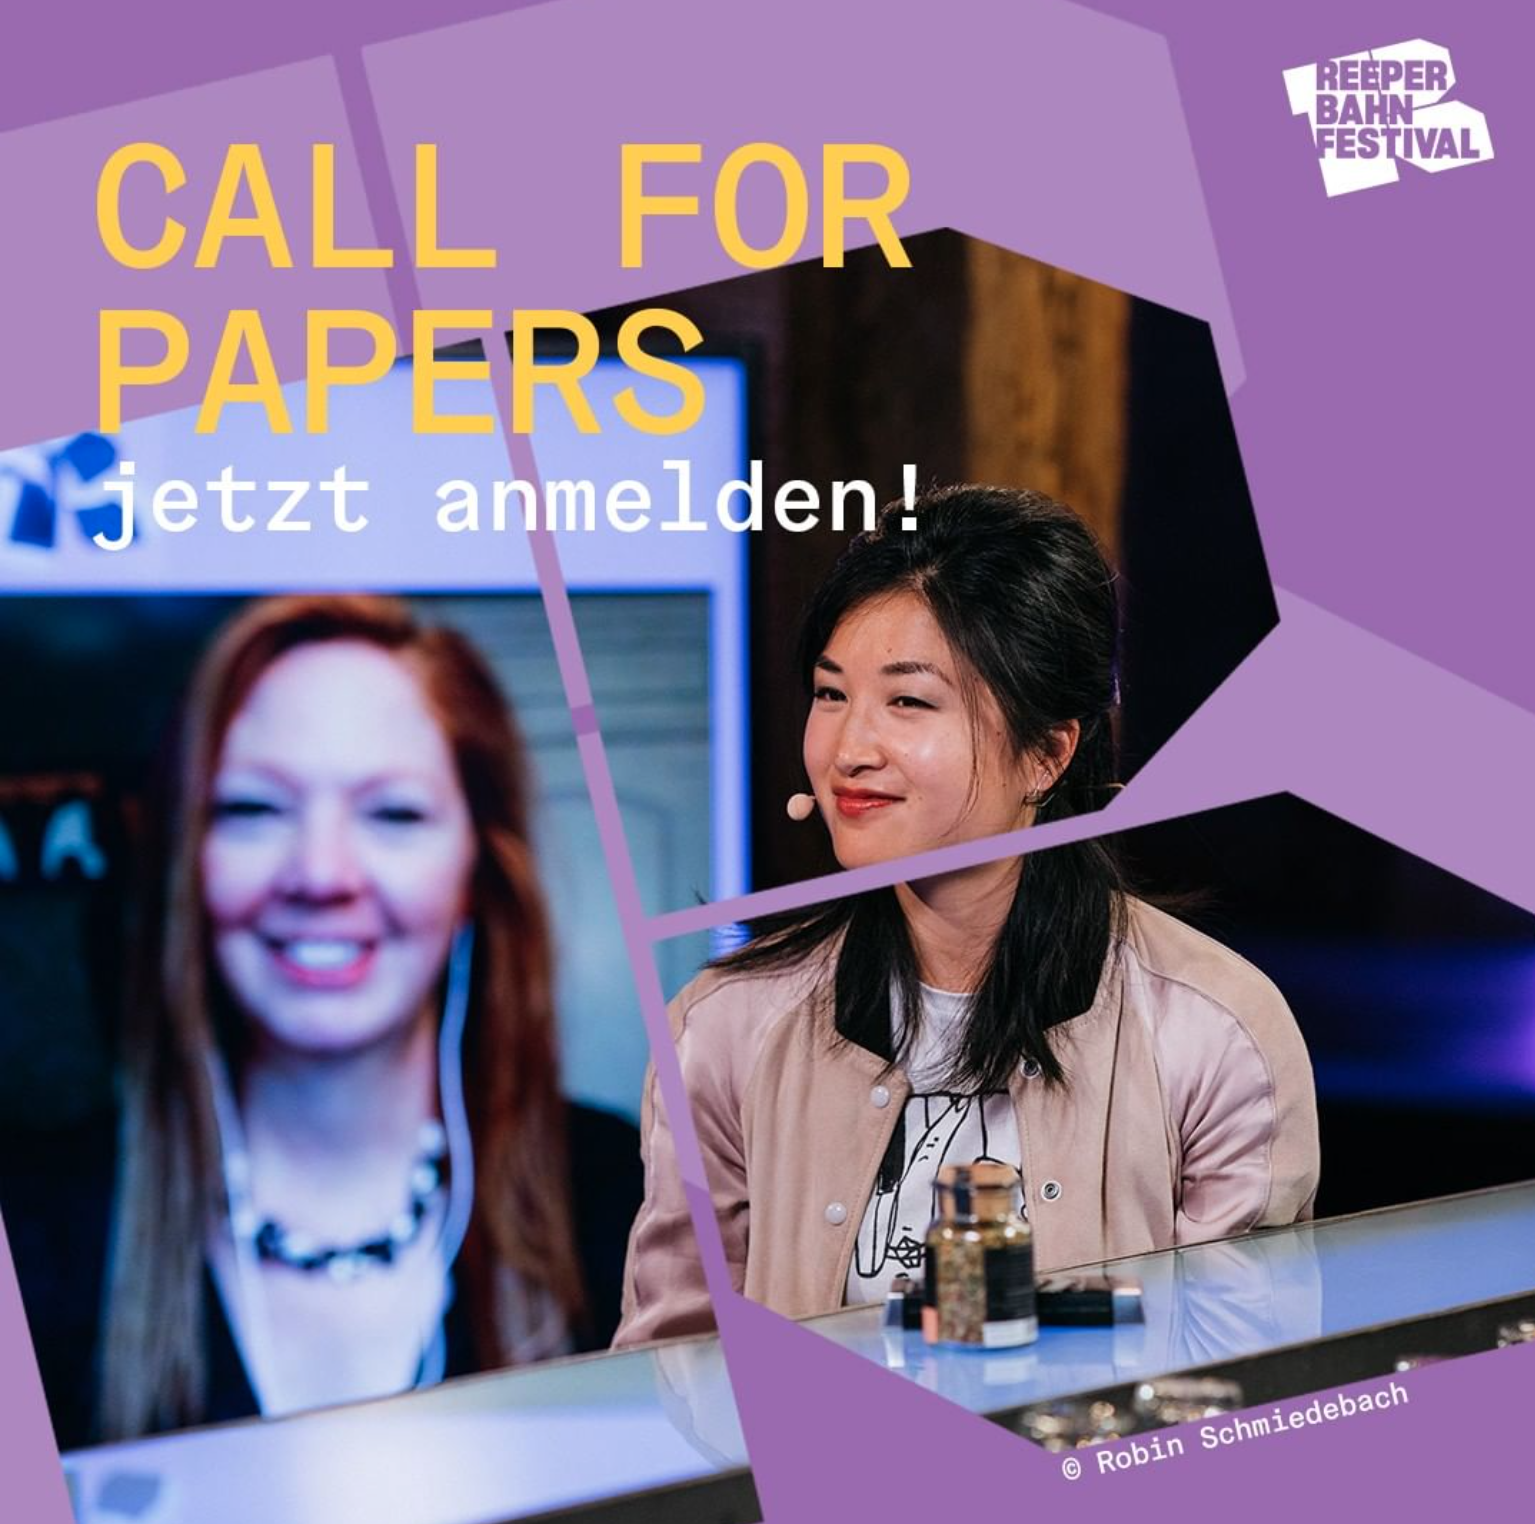 CALL FOR PAPERS: REEPERBAHN FESTIVAL CONFERENCE